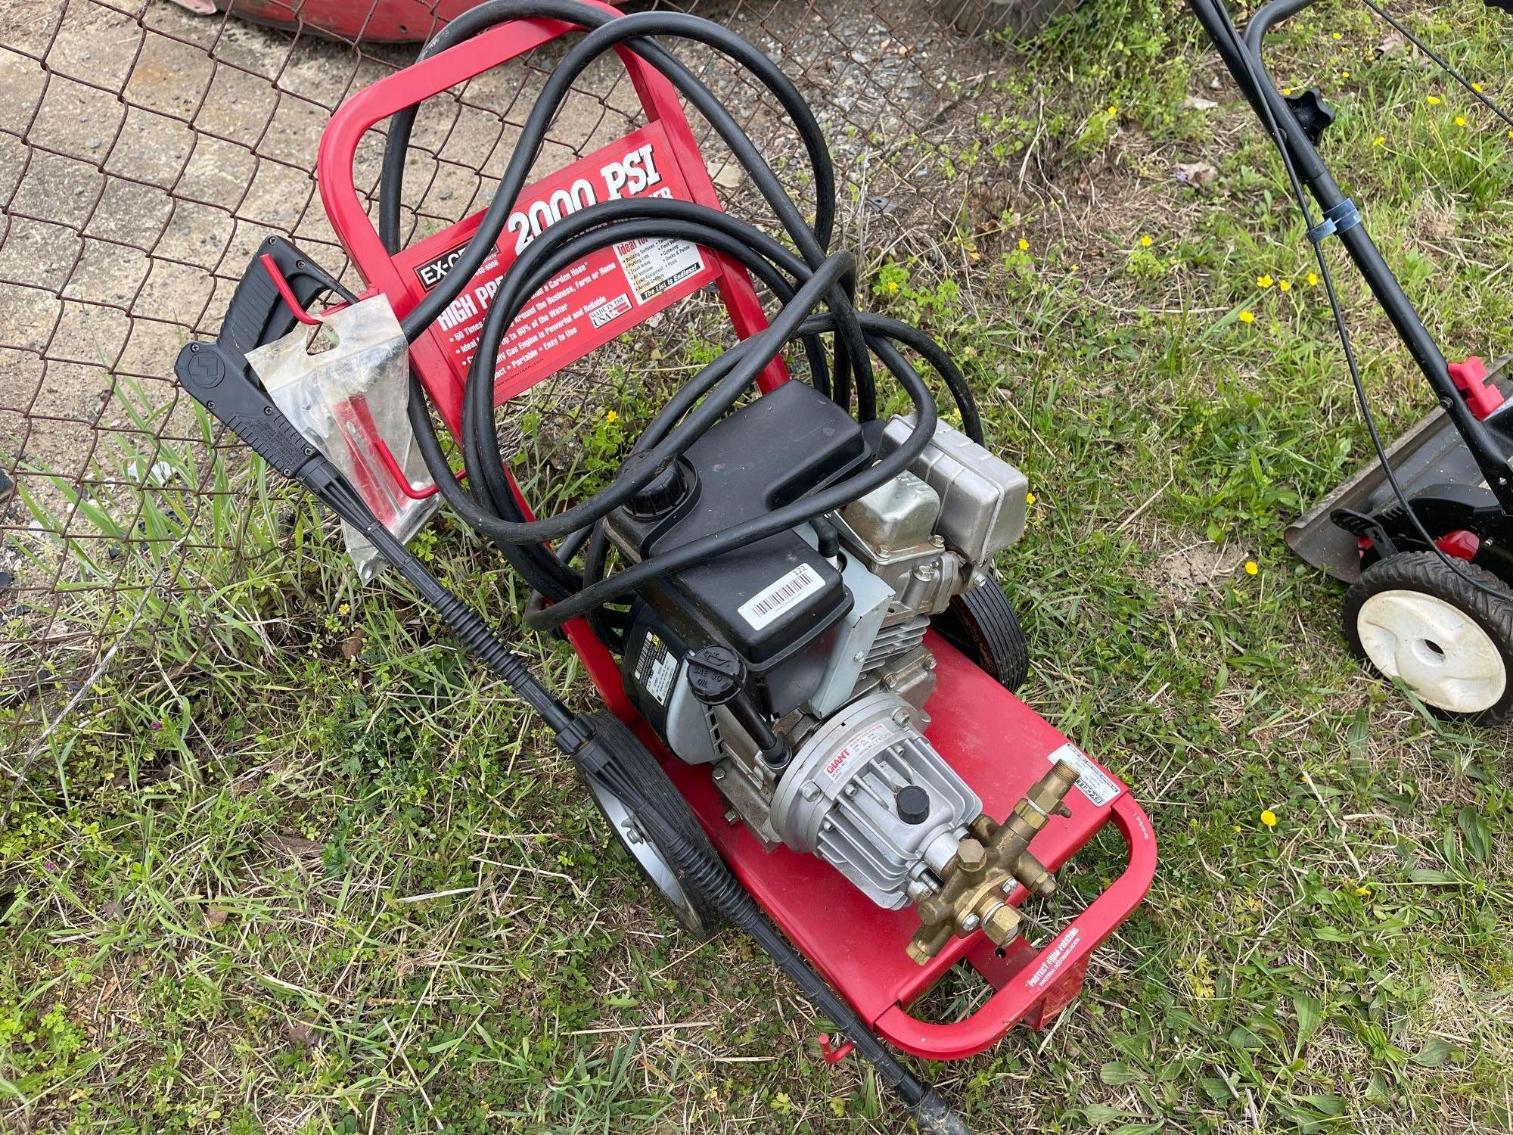 Image for EX-Cell Pressure Washer 2000 PSI, per seller- needs carb work